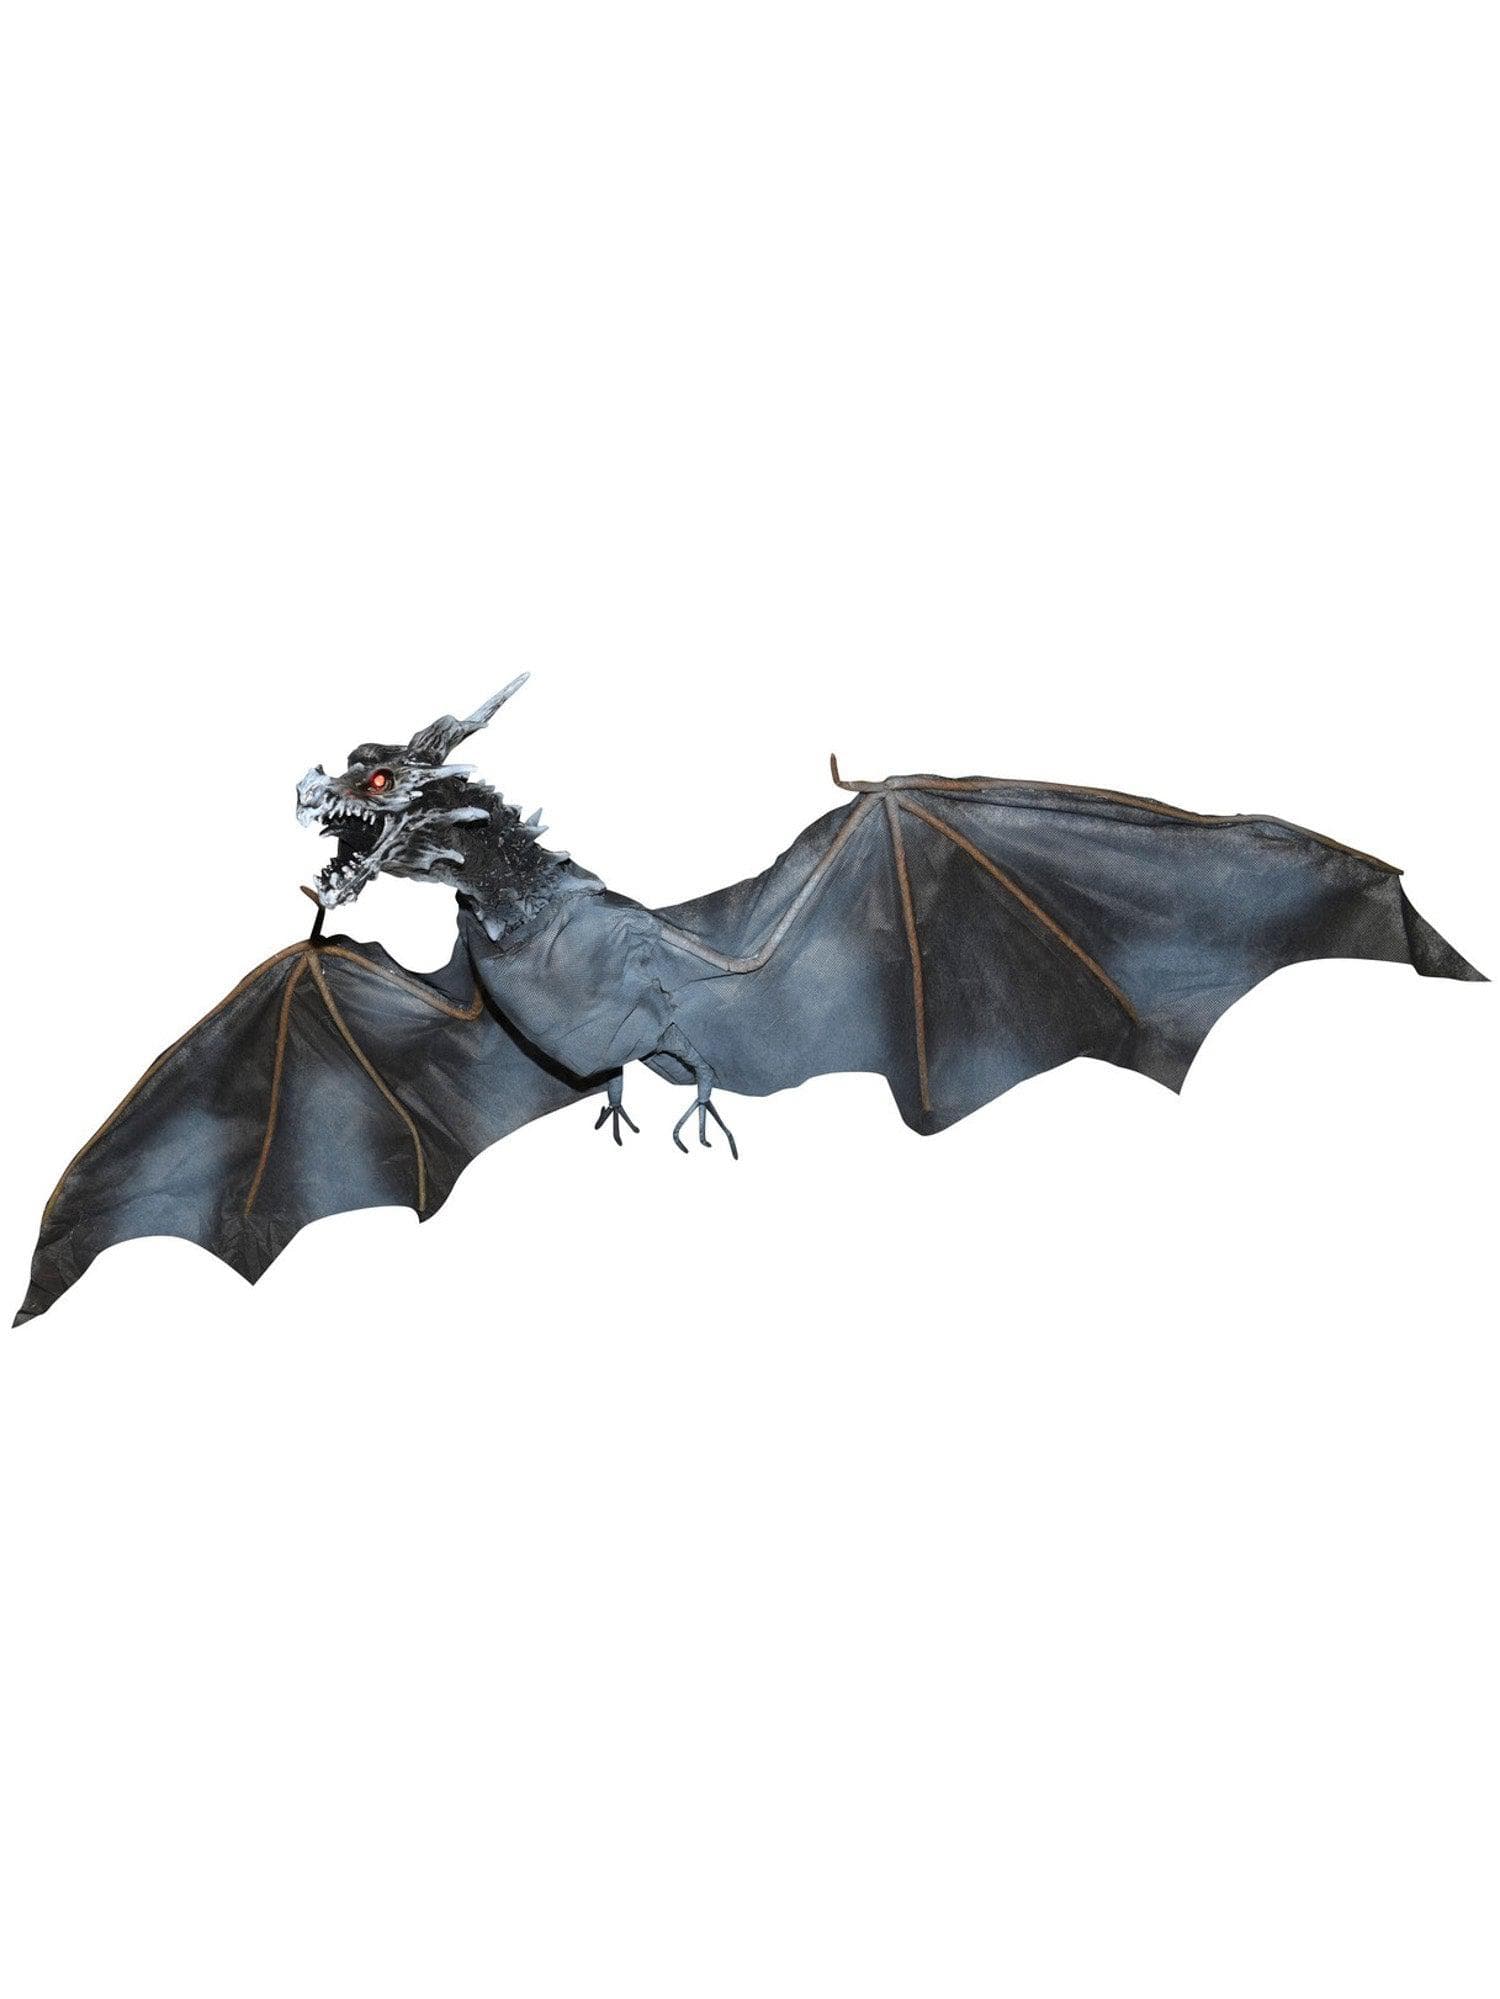 4 Foot Flying Dragon Light Up Animated Prop - costumes.com